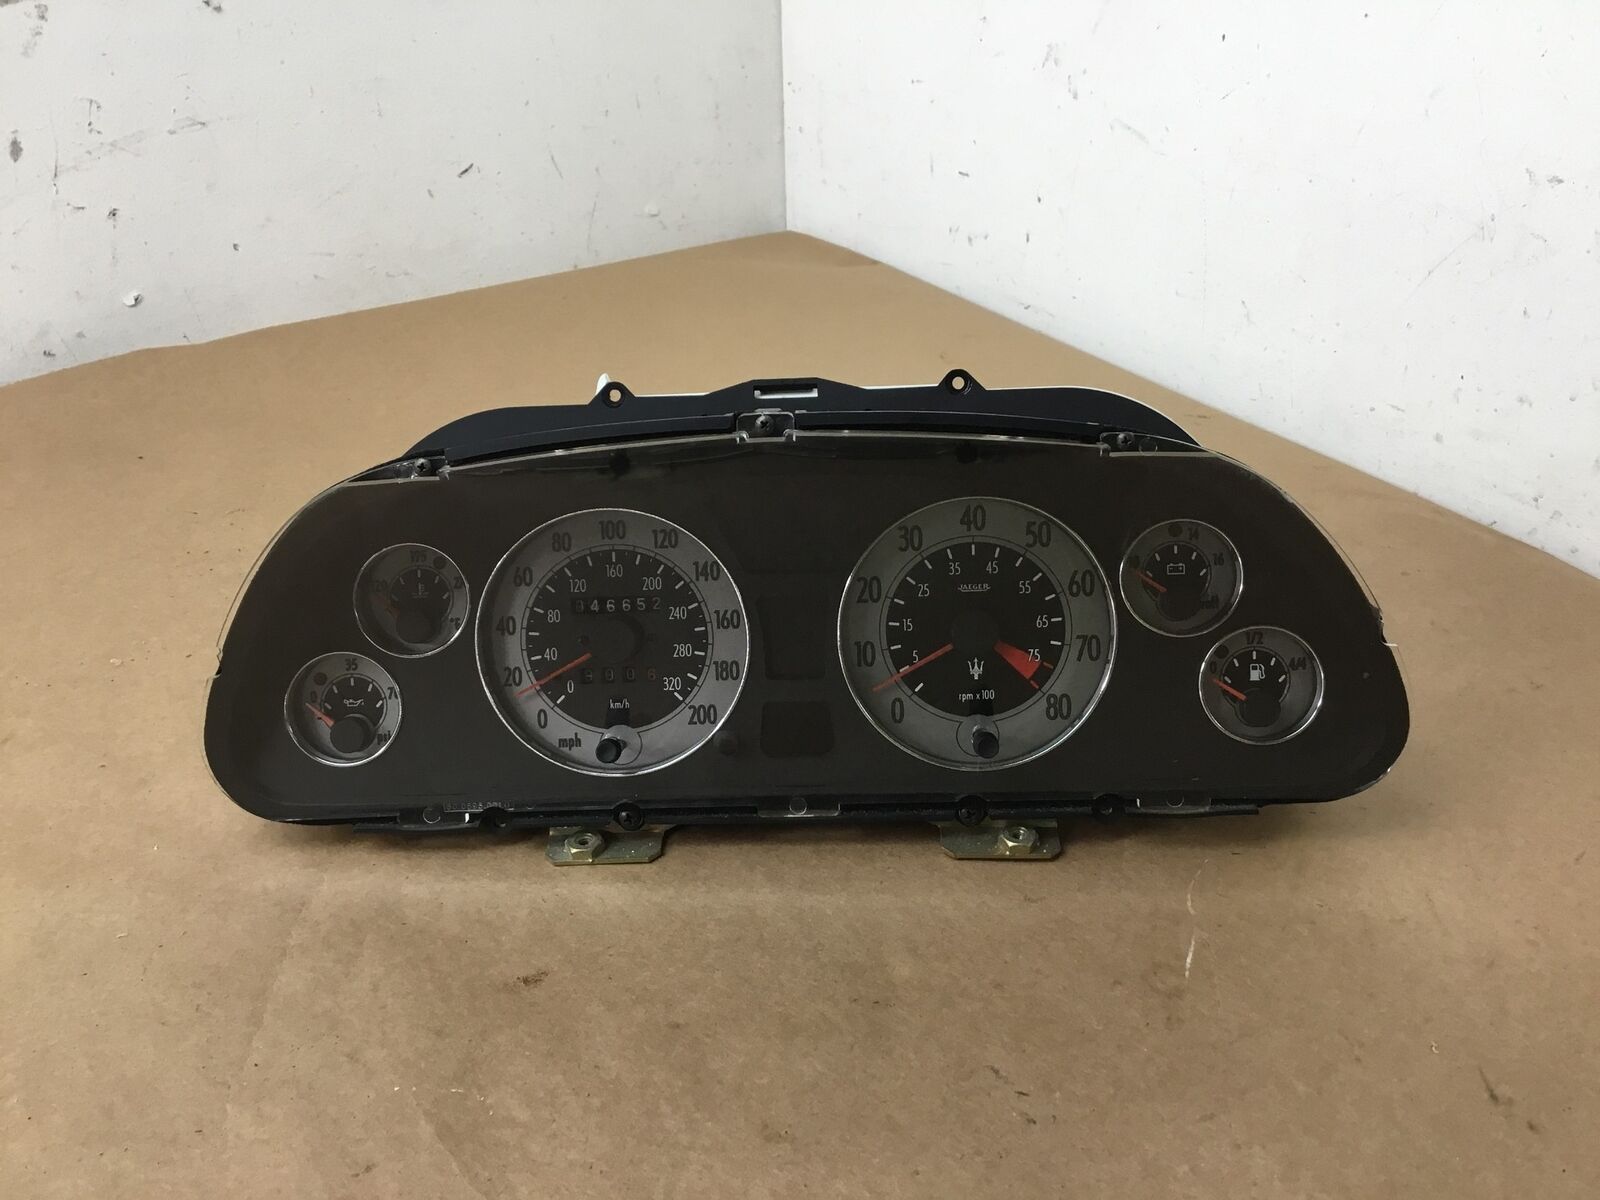 Maserati Coupe GT 2003 Dashboard Speedometer Instrument Cluster Gauge 02-06 :O